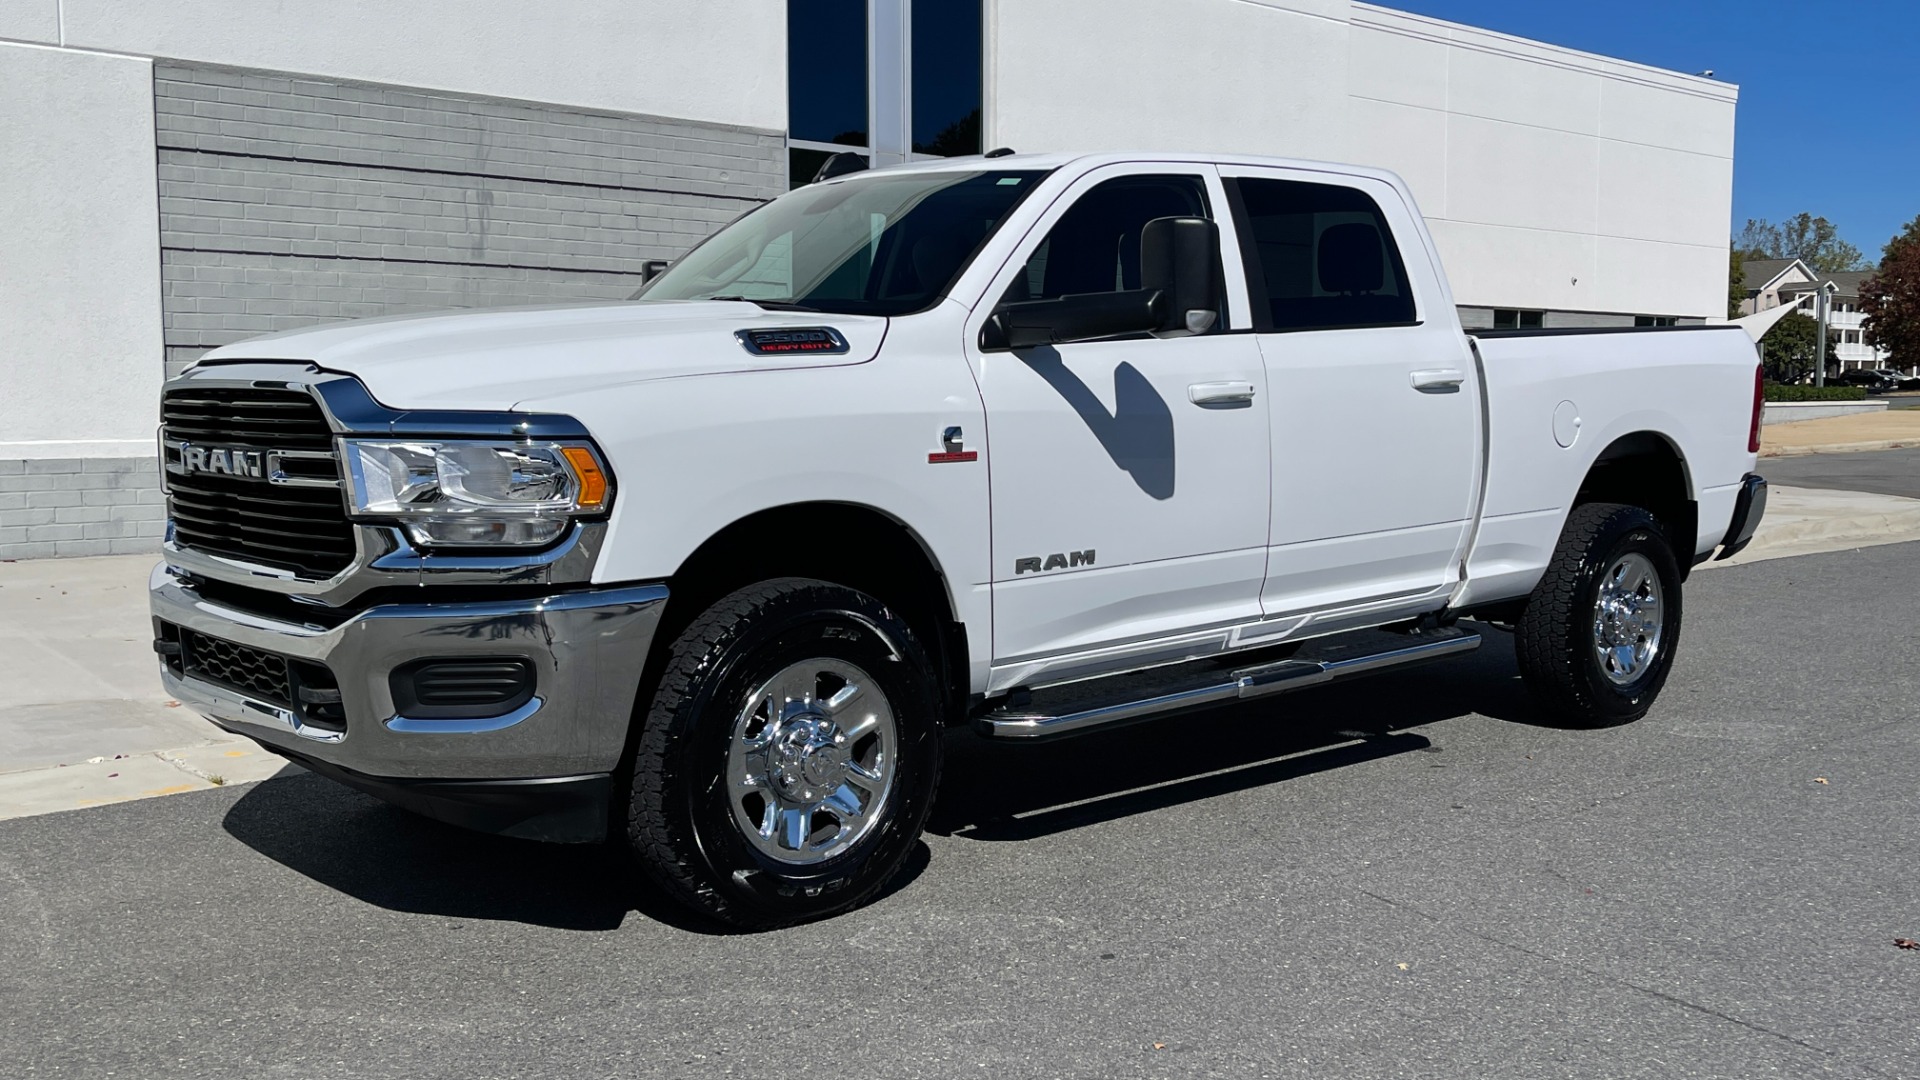 Used 2020 Ram 2500 BIG HORN / 6.7 CUMMINS DIESEL / CREW CAB / 4WD / SIDE STEPS for sale $54,995 at Formula Imports in Charlotte NC 28227 5